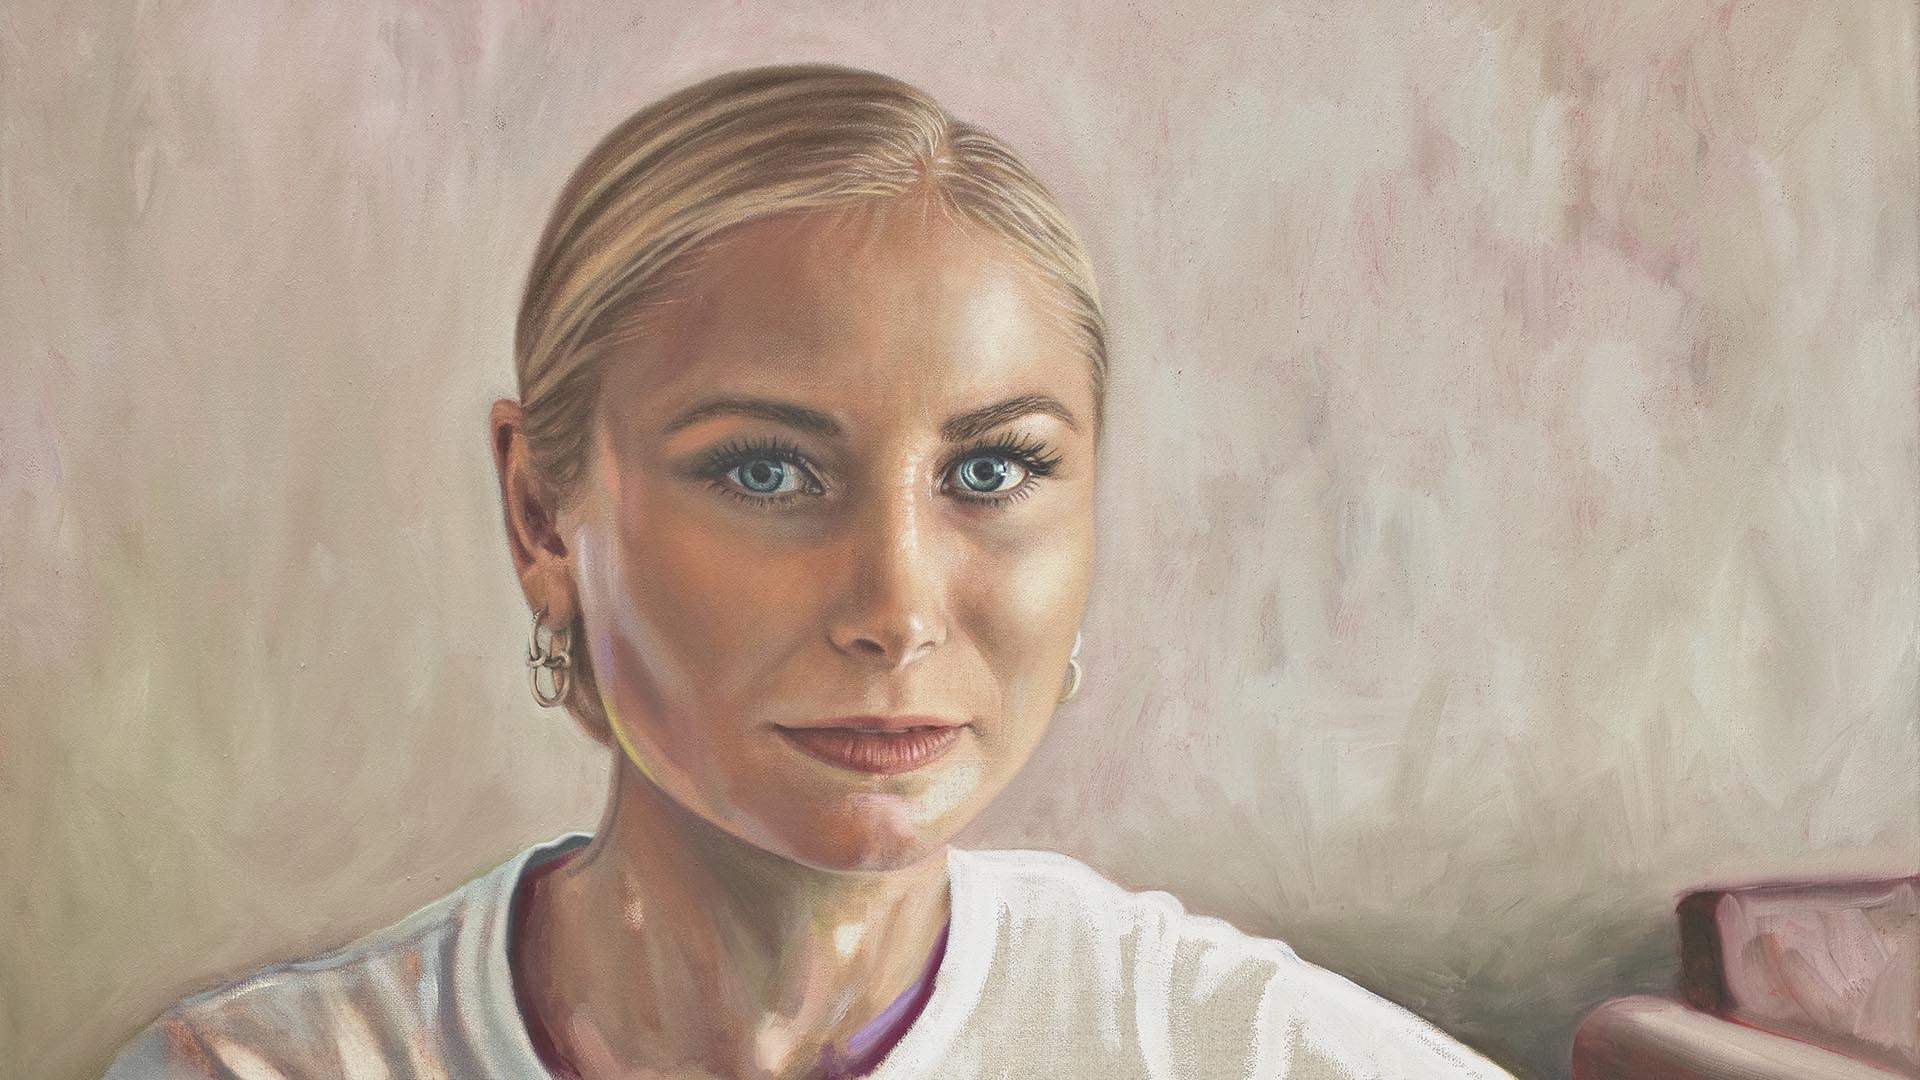 The Art Gallery of NSW's Prestigious Archibald Prize Has Announced Its 2021 Finalists